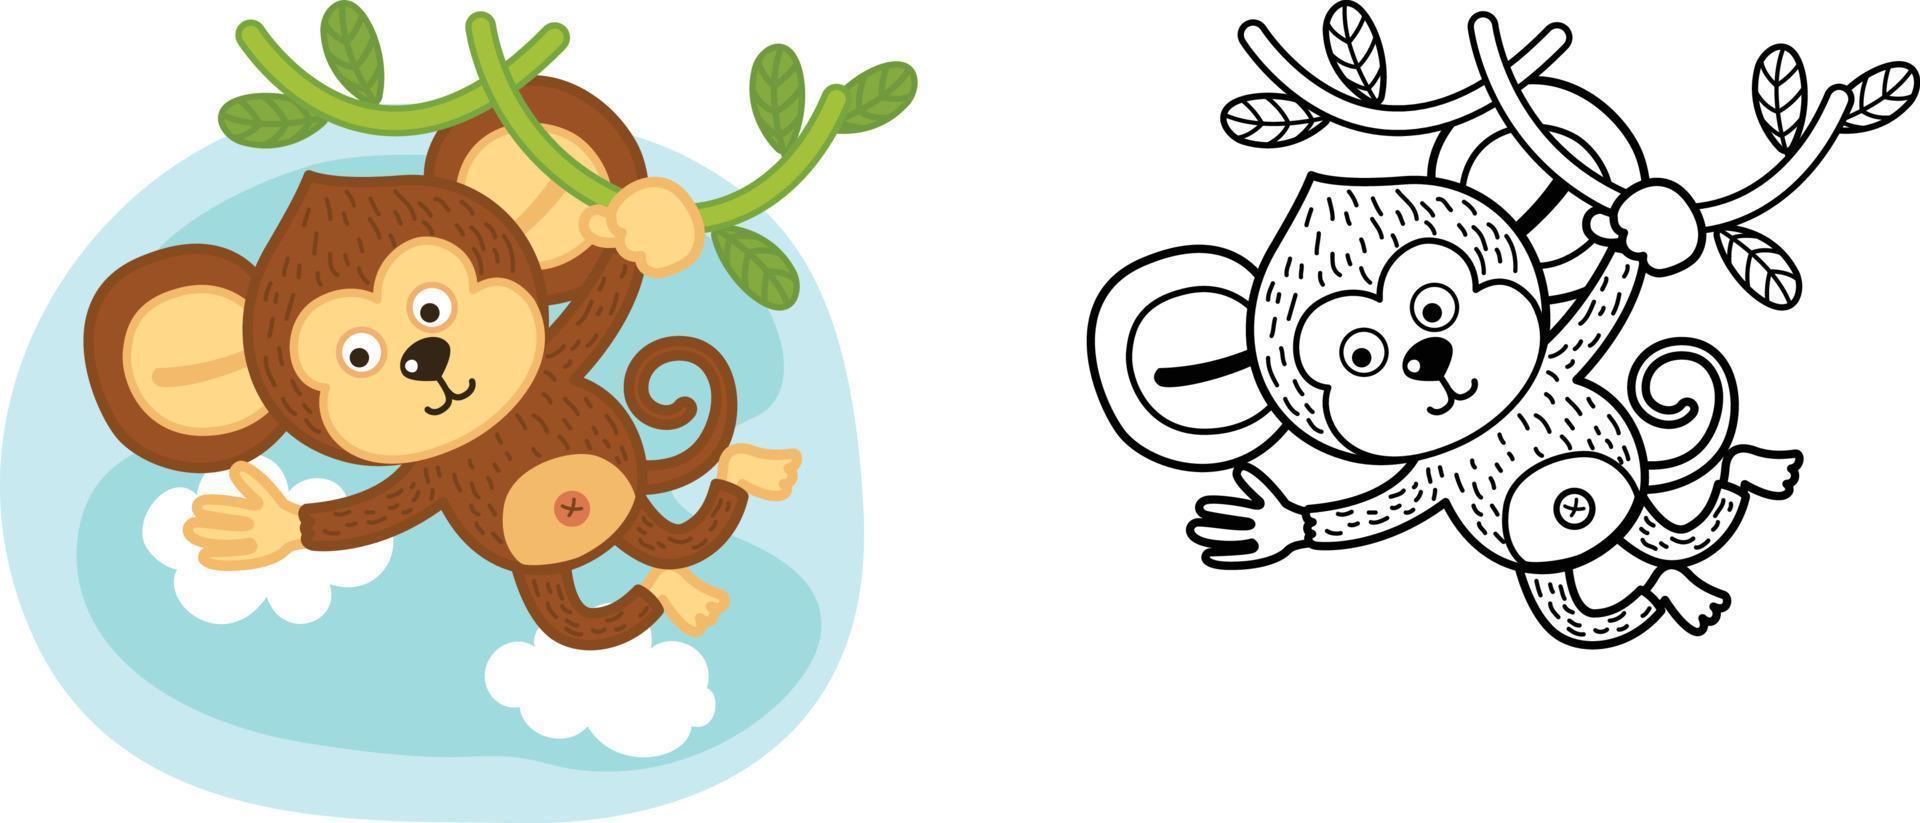 Illustration of educational coloring book animal monkey vector